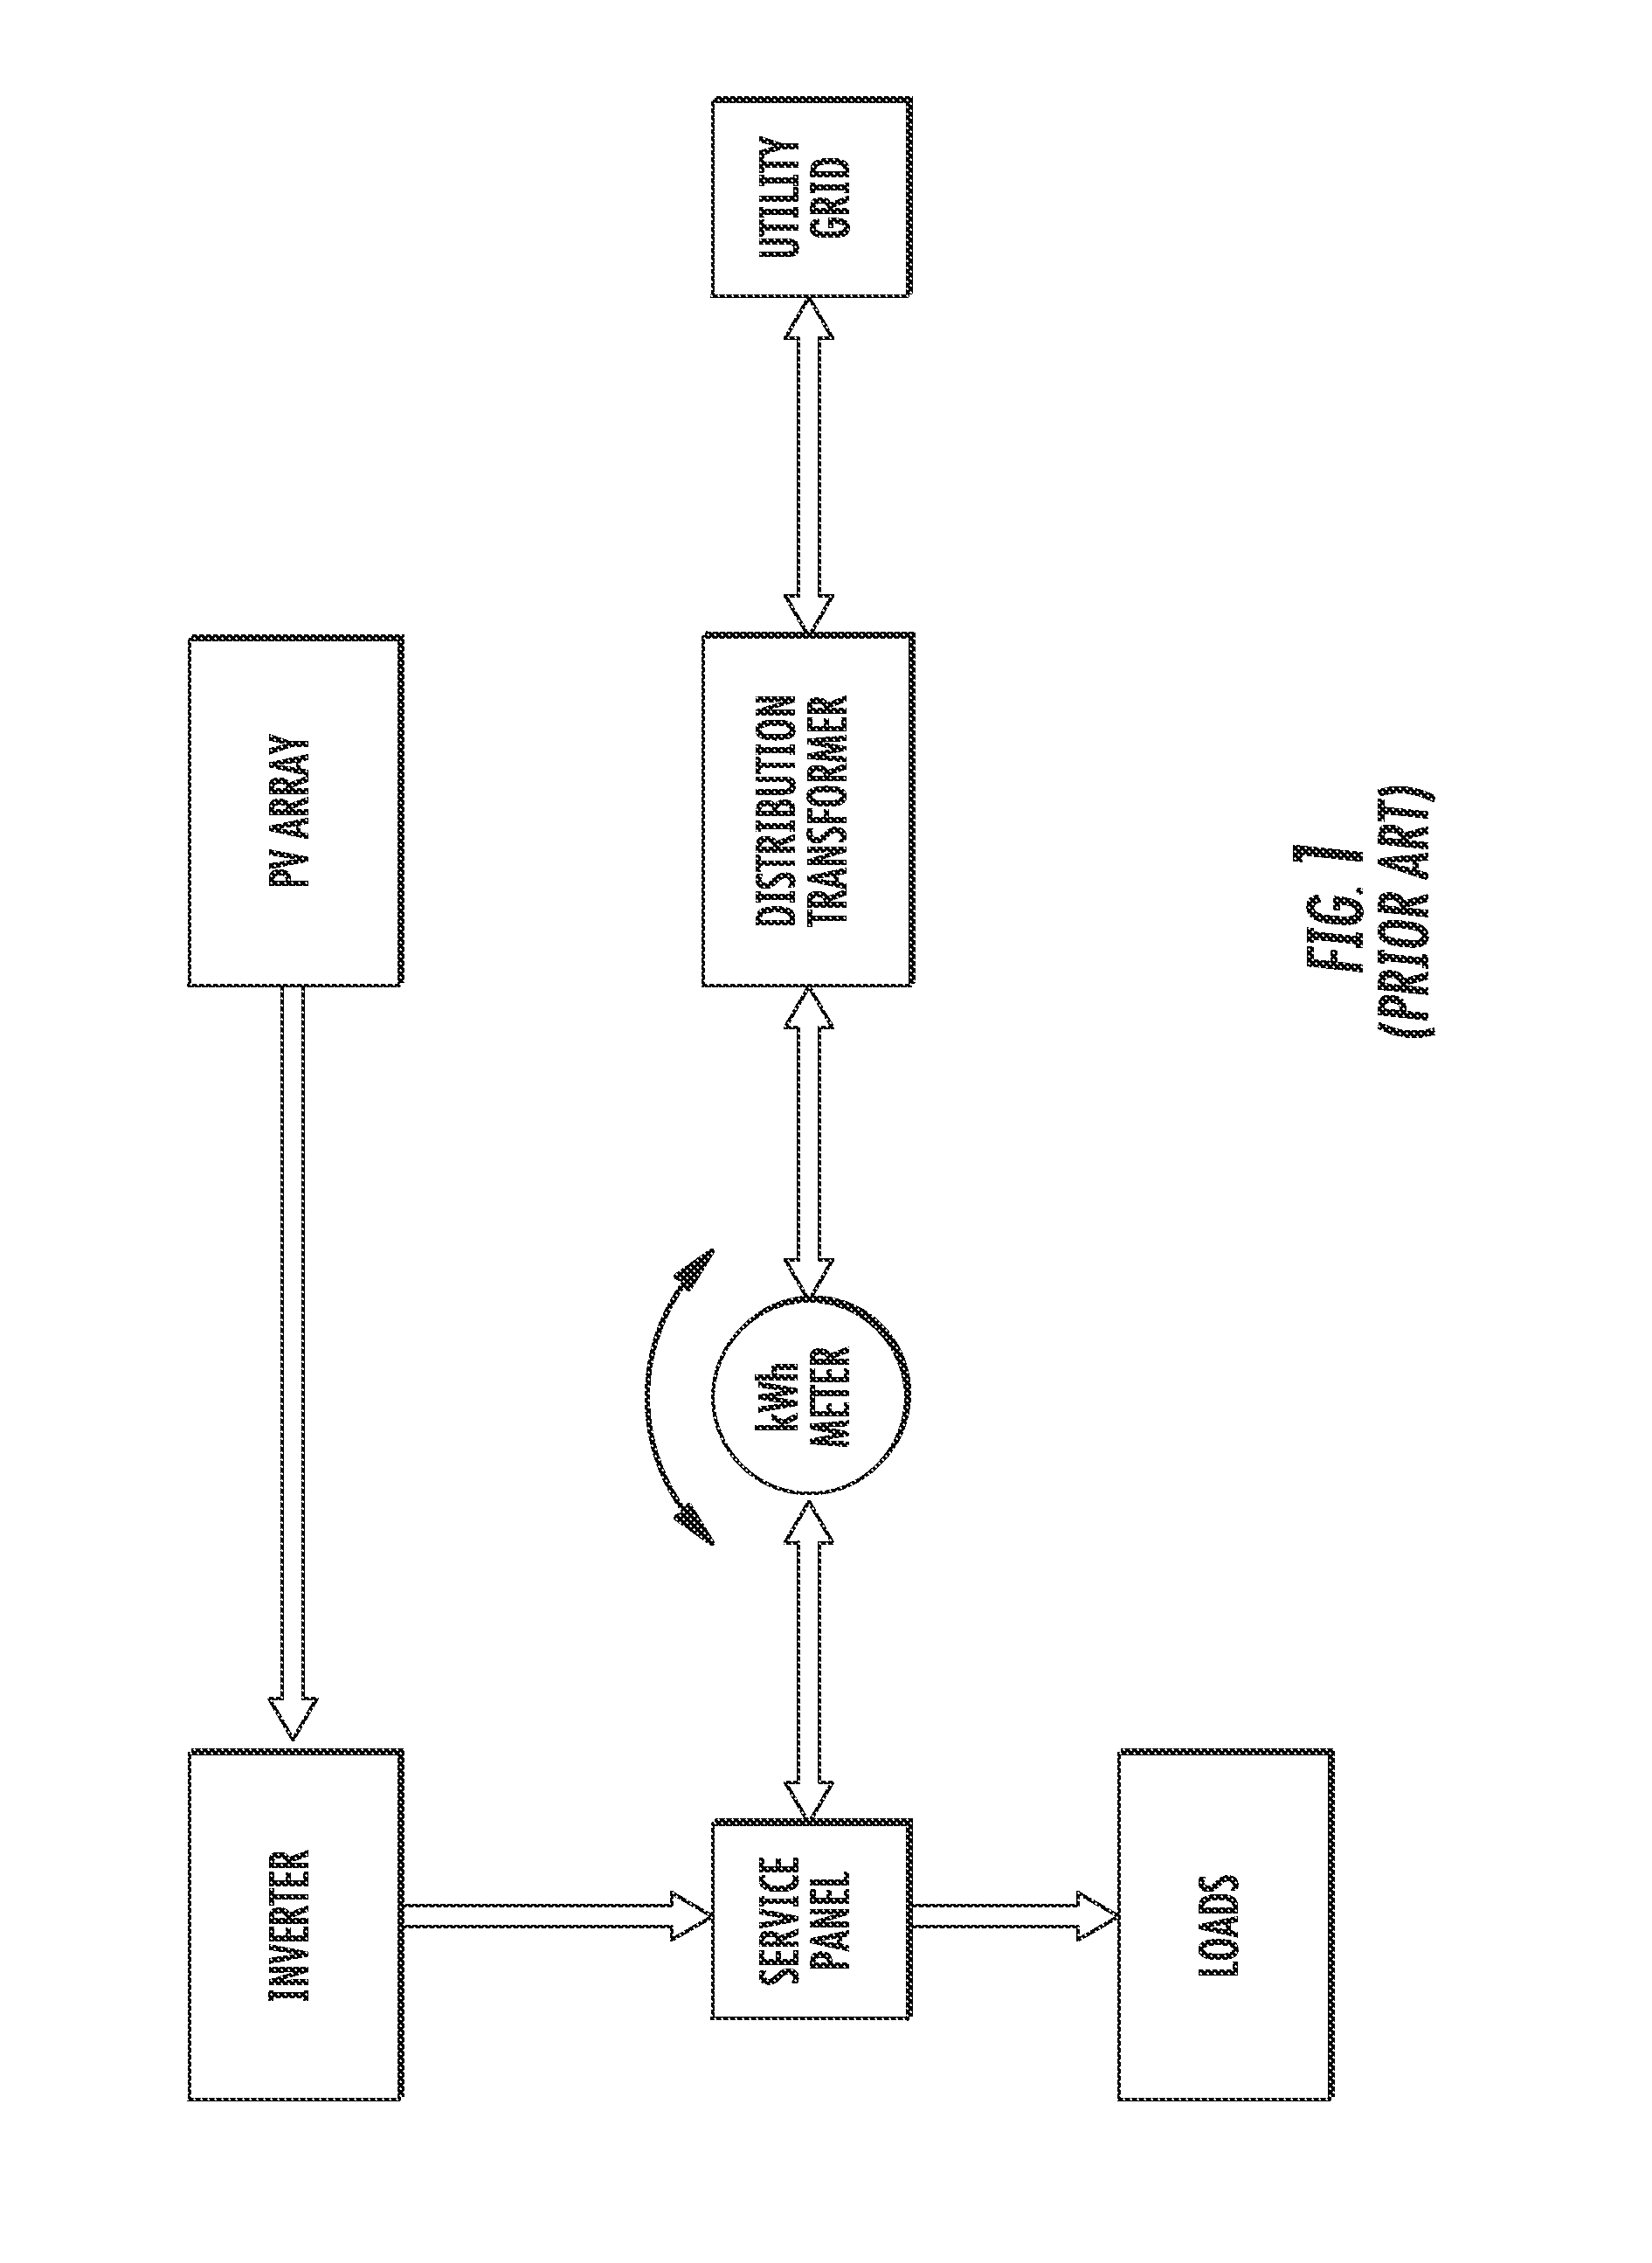 Intelligent photovoltaic interface and system